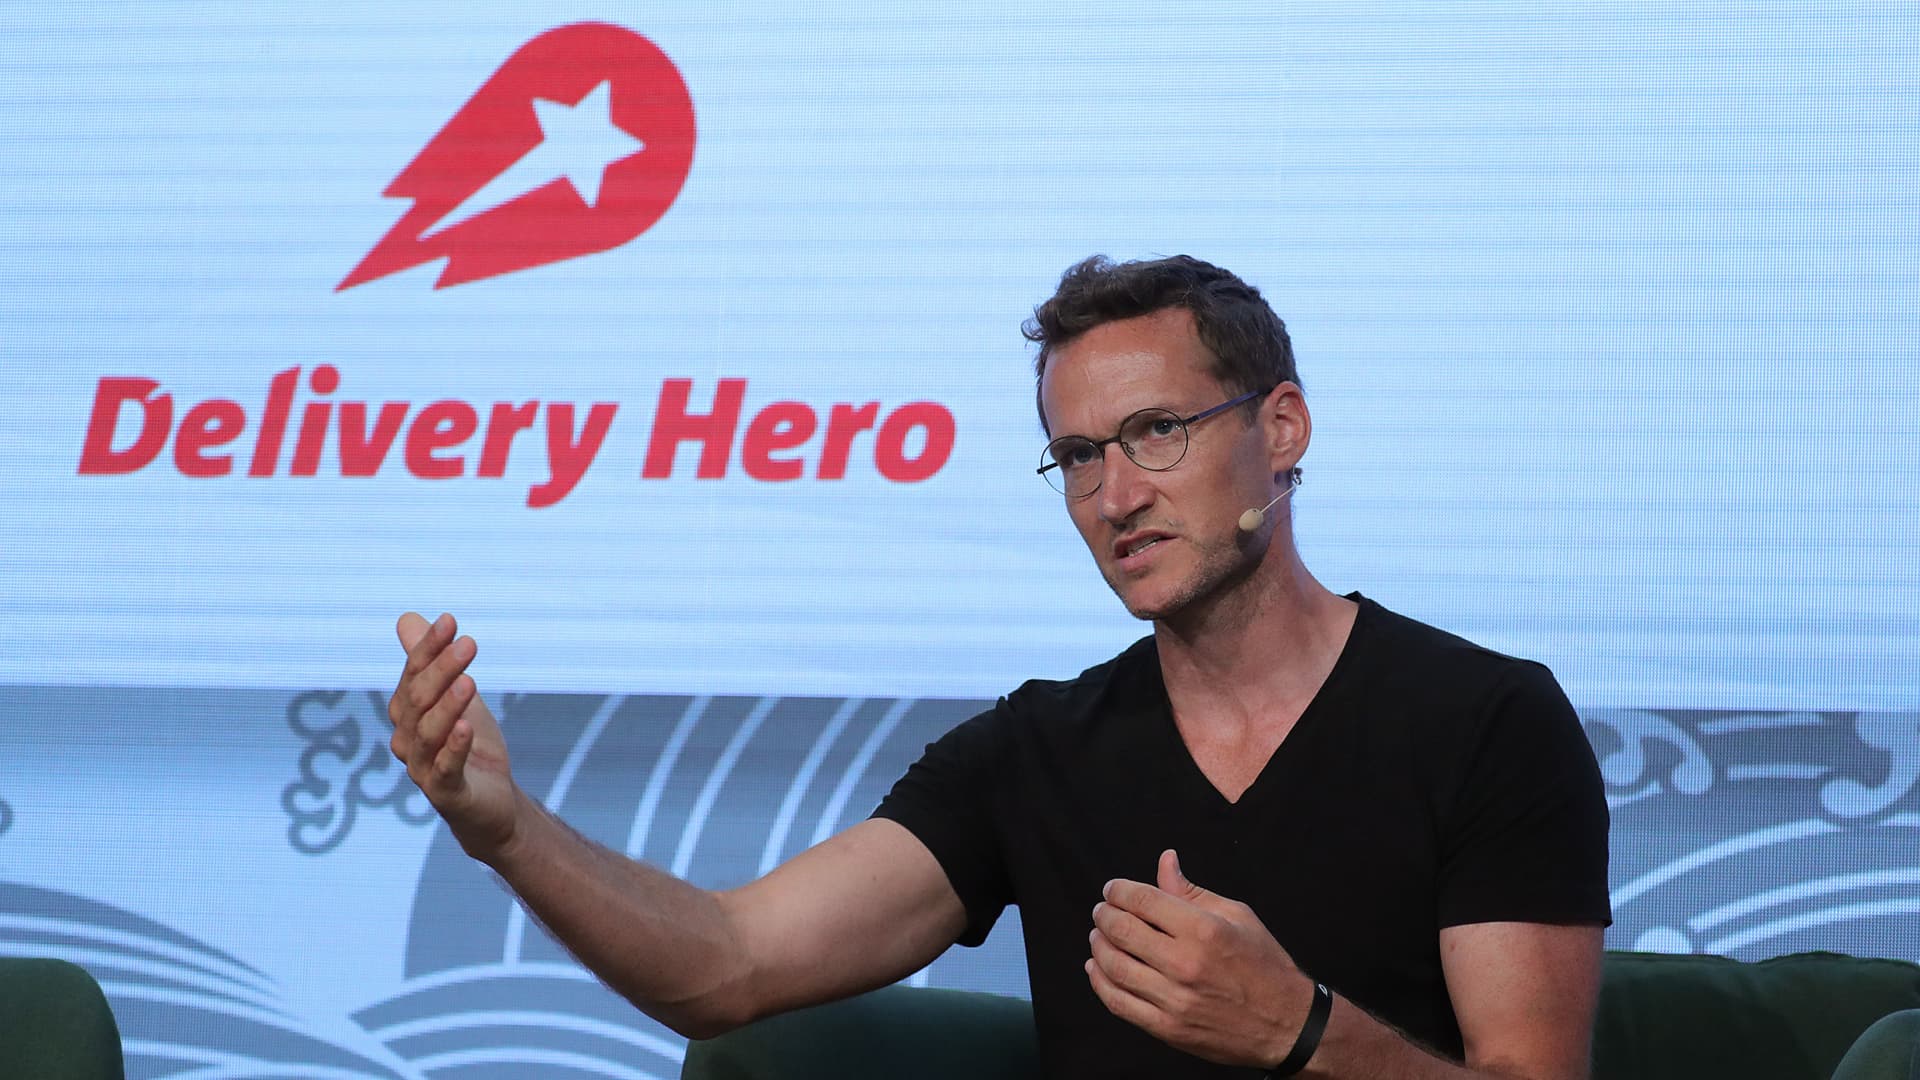 Delivery Hero (DHER) unaudited earnings released after 26% stock plunge